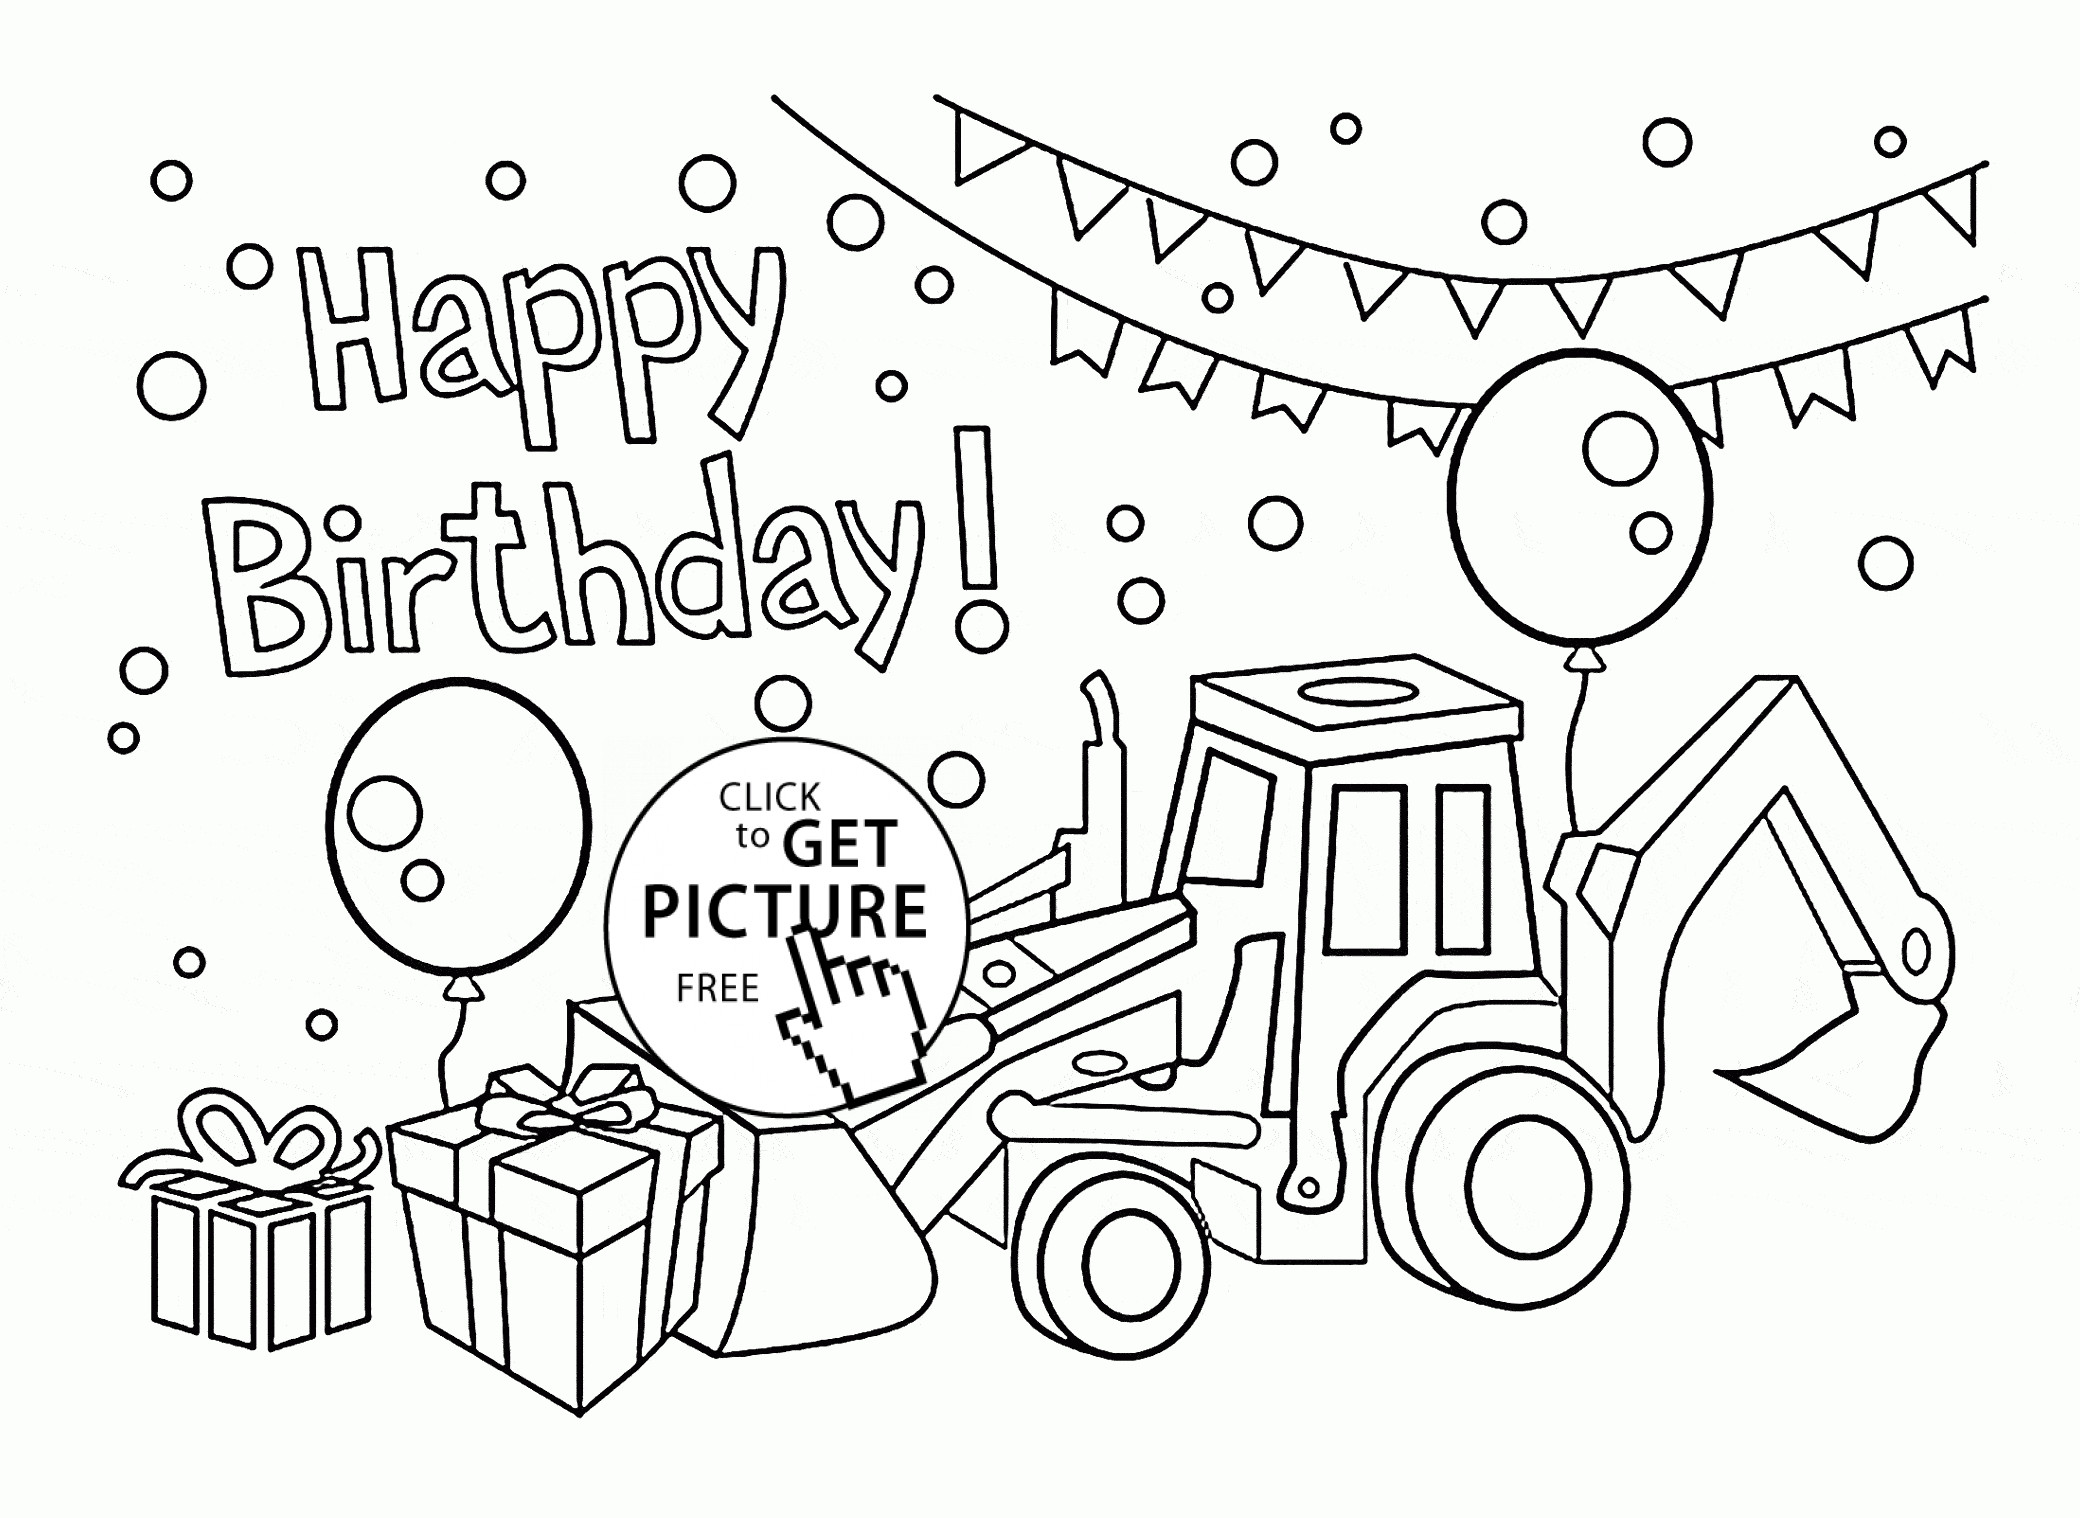 Happy Birthday Coloring Pages For Boys
 Happy Birthday Card for Boys coloring page for kids